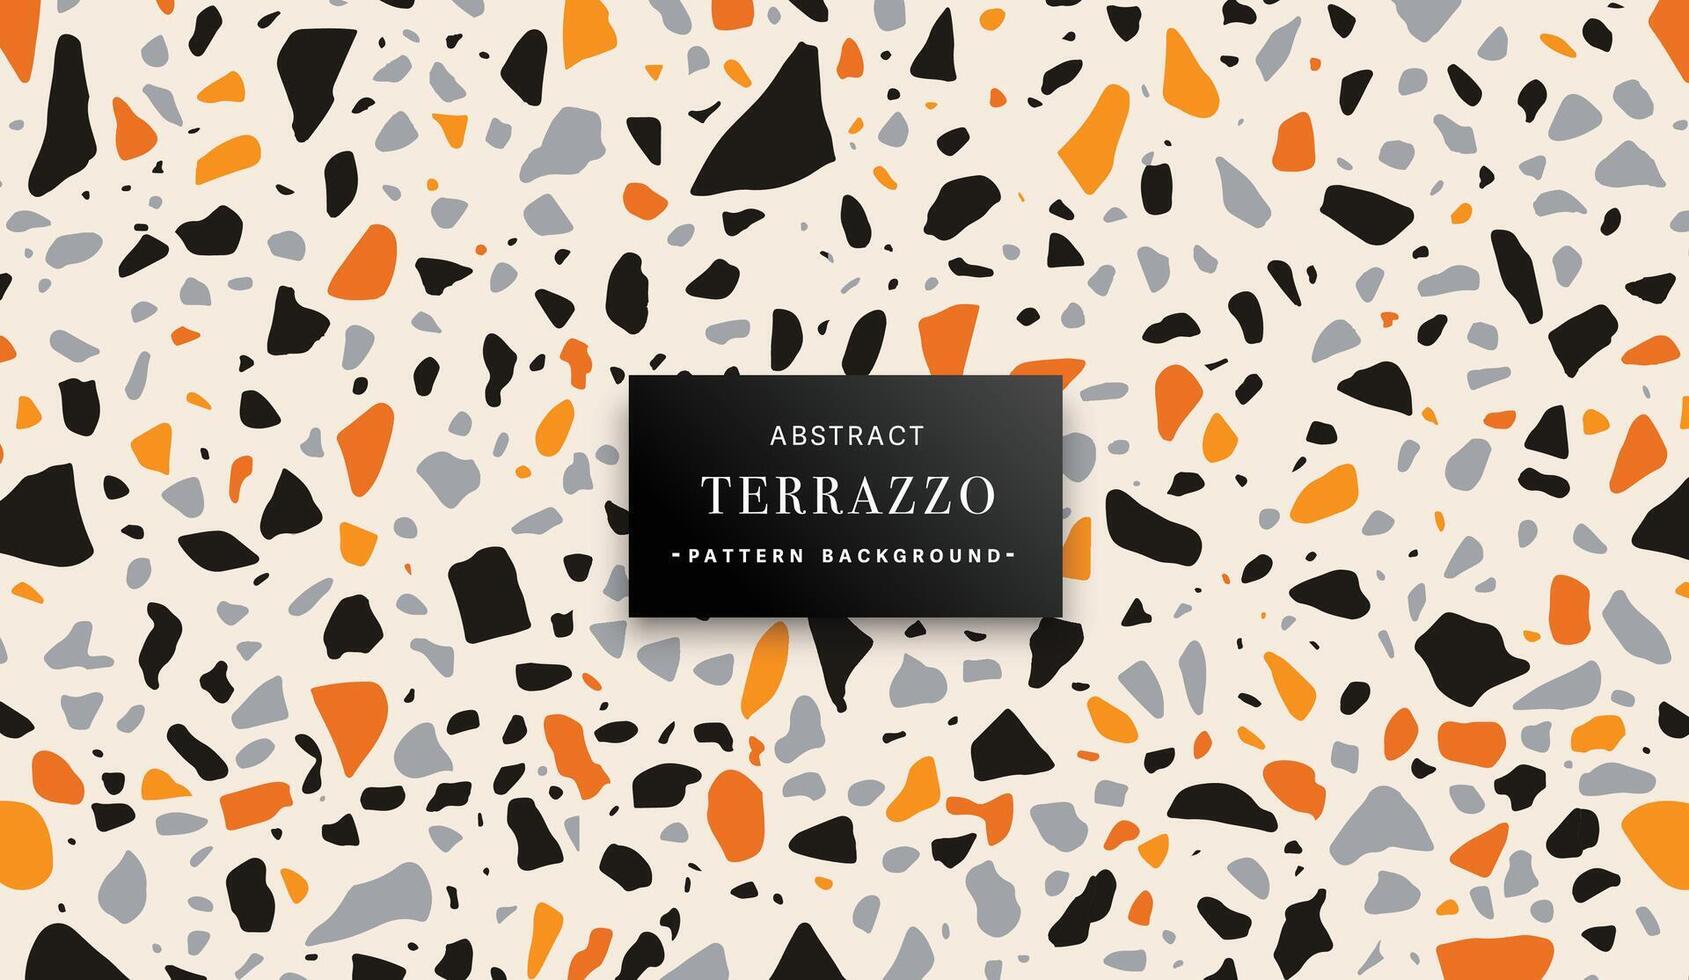 Terrazzo tiles pattern background for Floor and Wall Design, vector concept